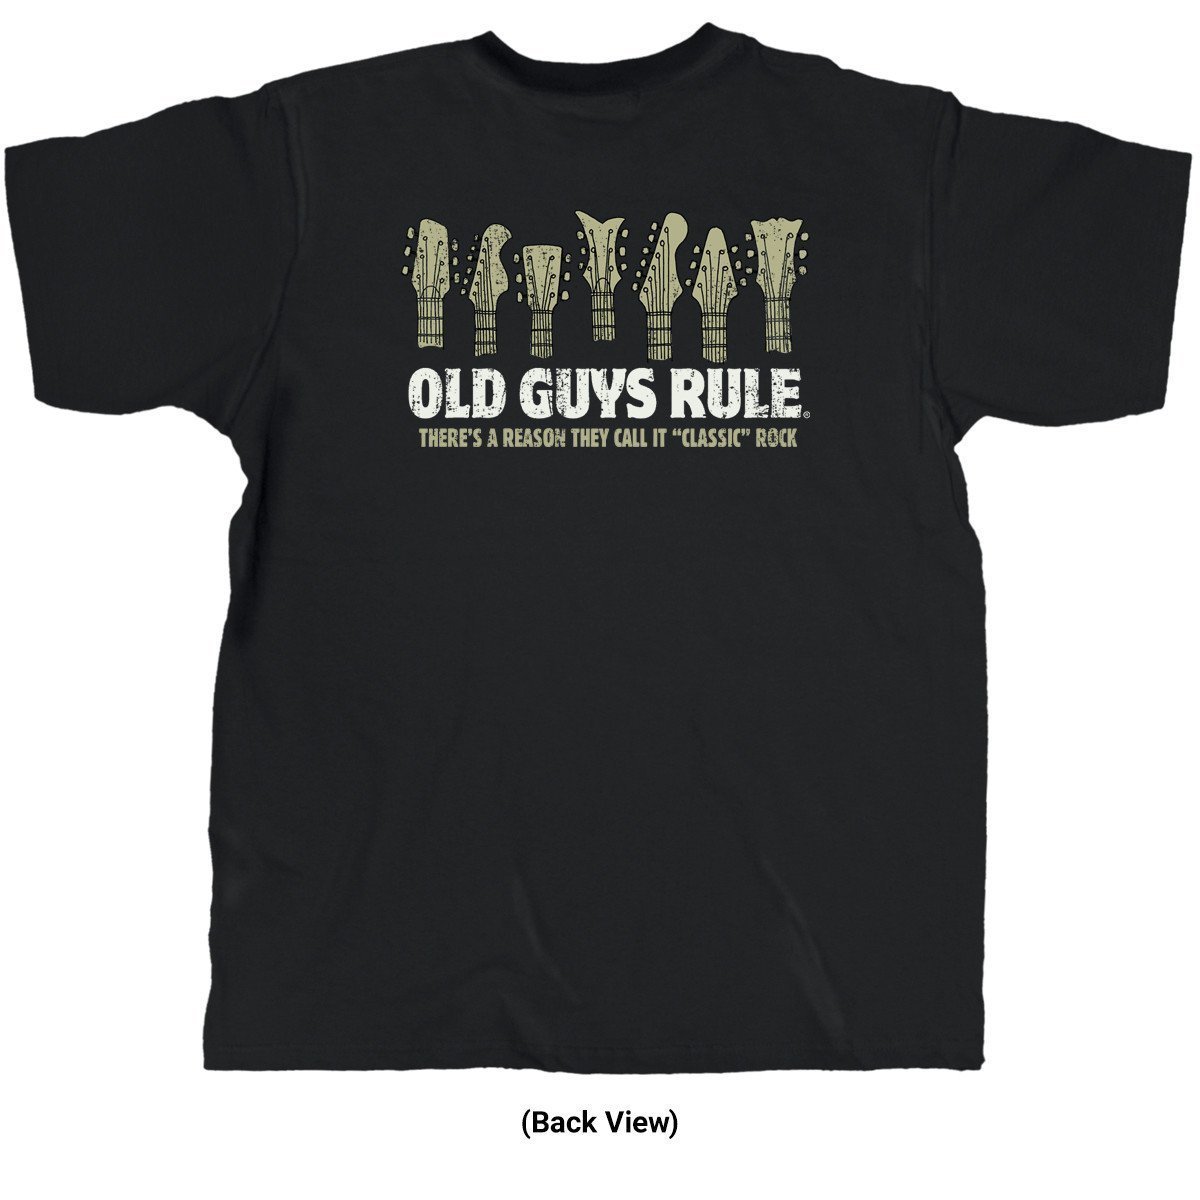 Old Guys Rule T-Shirts  Because We Do and Our Shirts Say So